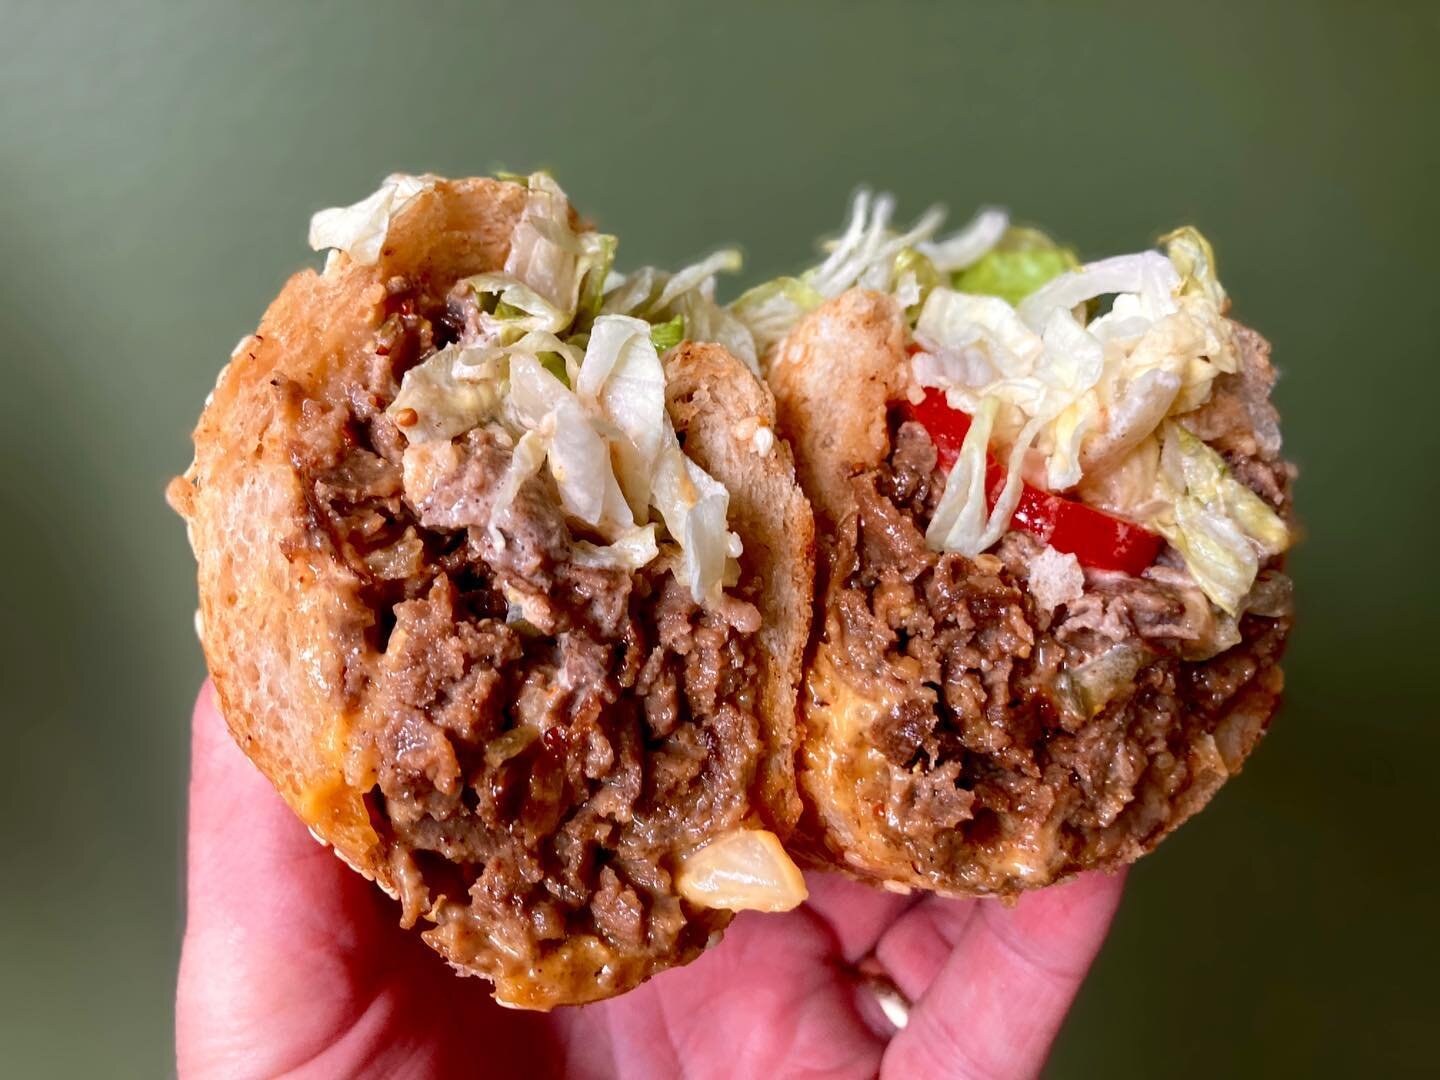 New cheesesteak has hit the menu - say hello to McSteak! All the classic burger flavors, but in a cheesesteak. This is sandwich comfort food at its finest. We're lovin&rsquo; it.
.
Sandwich deets: grilled steak, grilled onion, American cheese, pickle